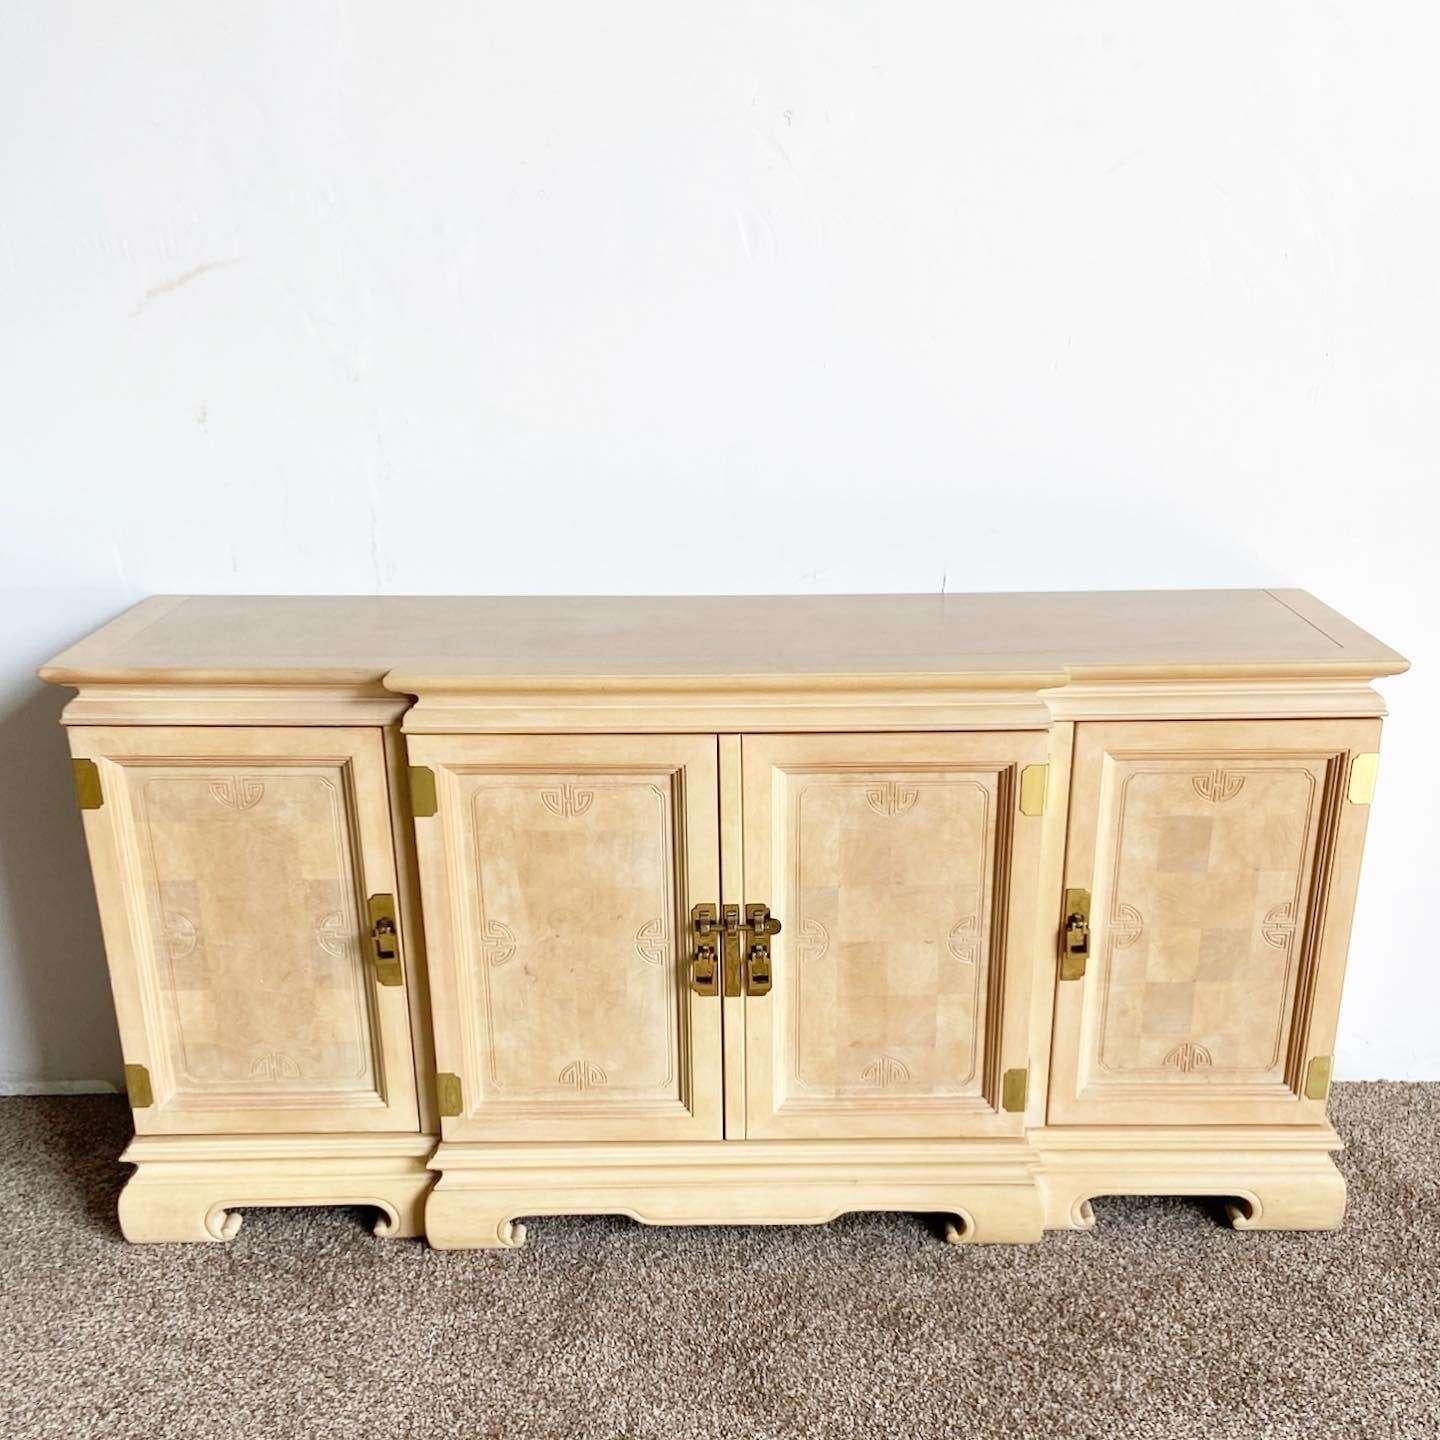 Exceptional vintage chinoiserie Ming style credenza. Features a light brown finish with brass accents.
